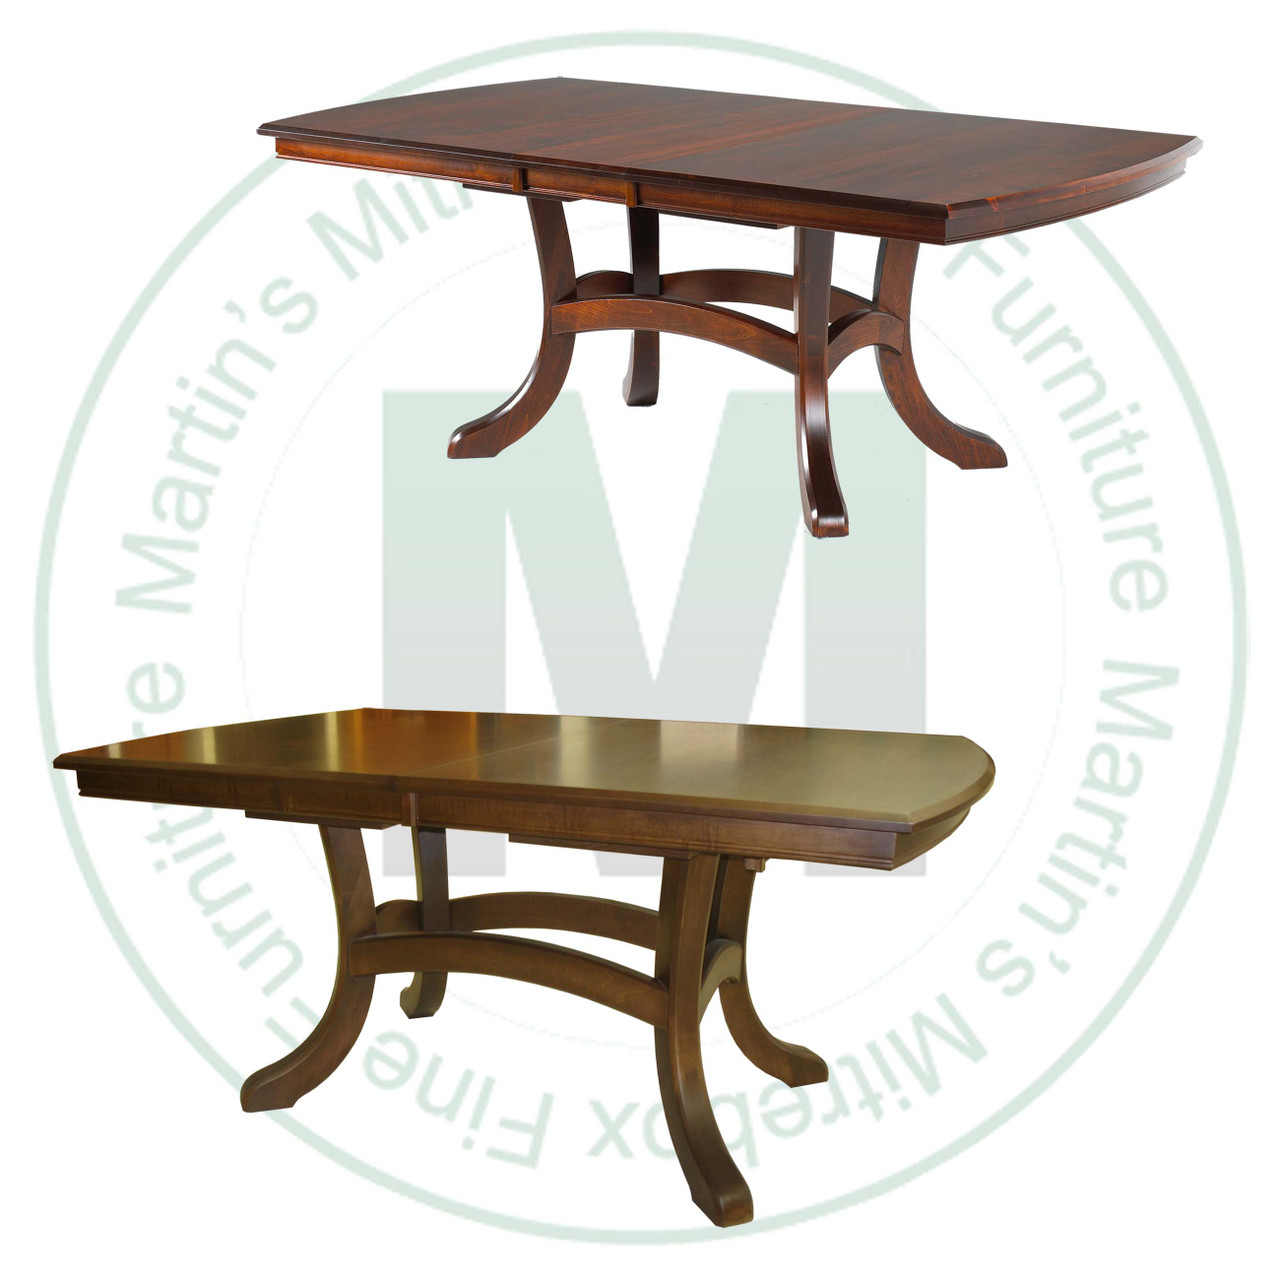 Oak Jordan Double Pedestal Table 42''D x 96''W x 30''H With 2 - 12'' Leaves. Table Has 1.25'' Thick Top